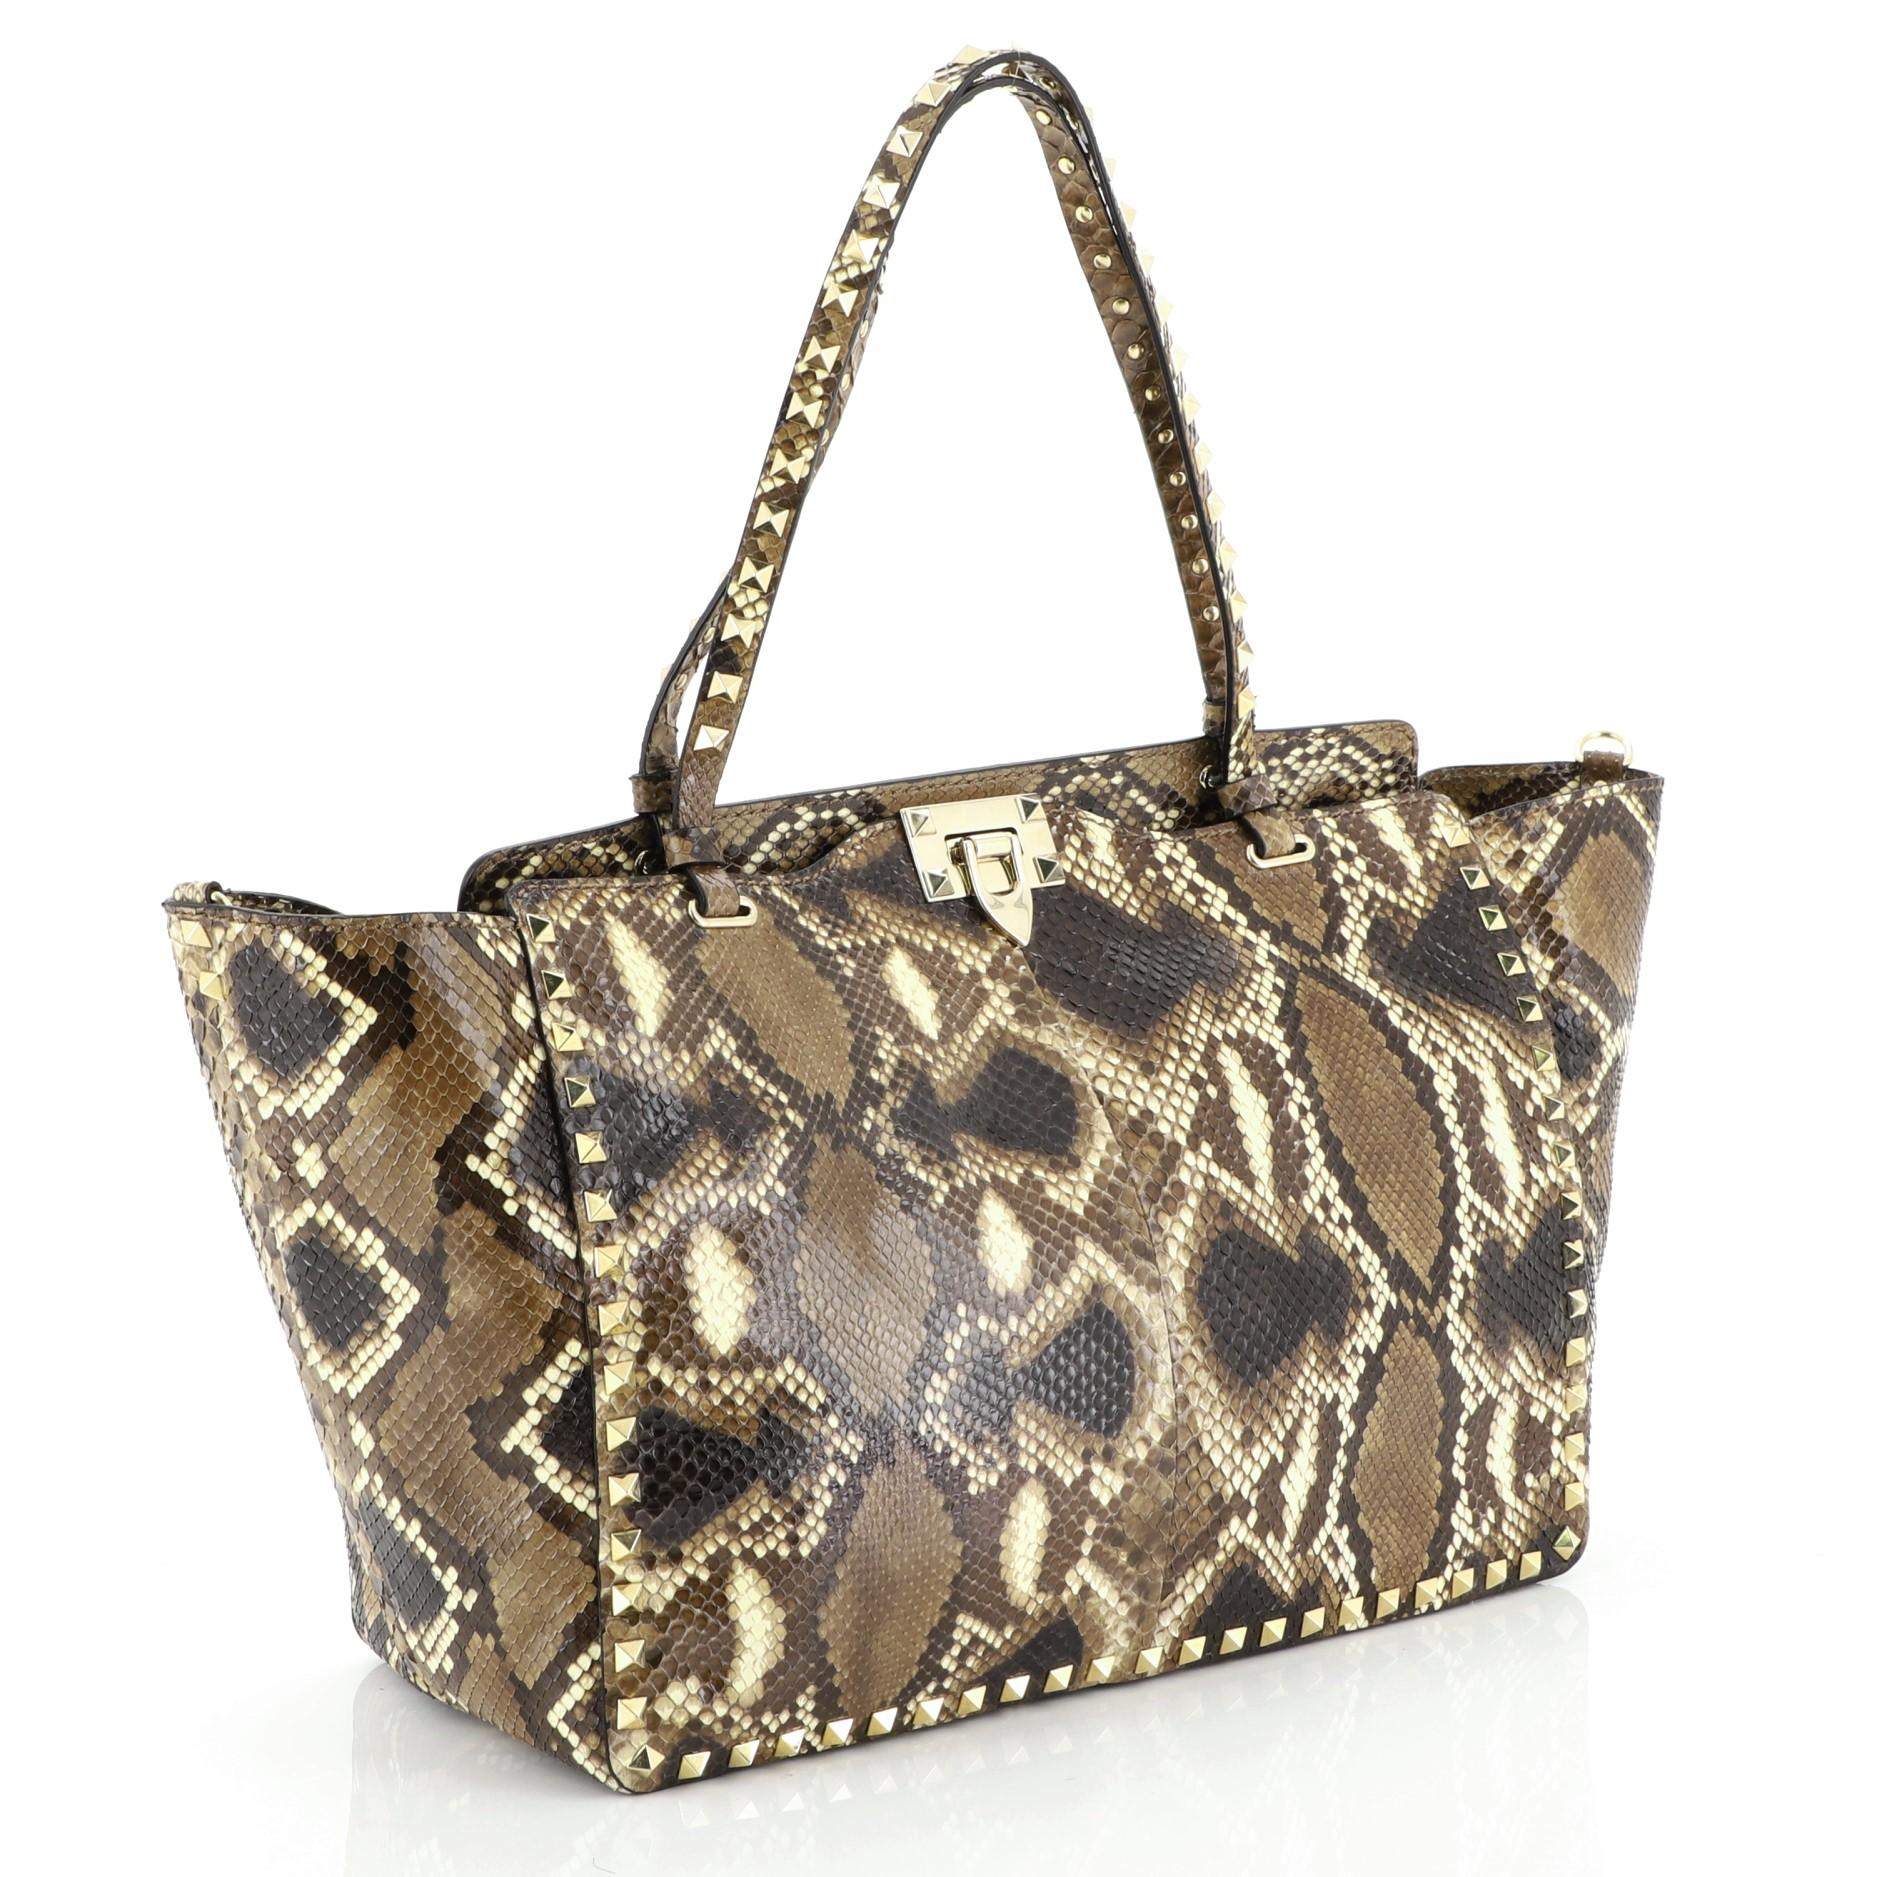 This Valentino Rockstud Tote Python Large, crafted from genuine brown python skin, features dual tall flat handles, pyramid stud details and gold-tone hardware. Its clasp closure opens to a neutral fabric interior with zip pocket. This item can only